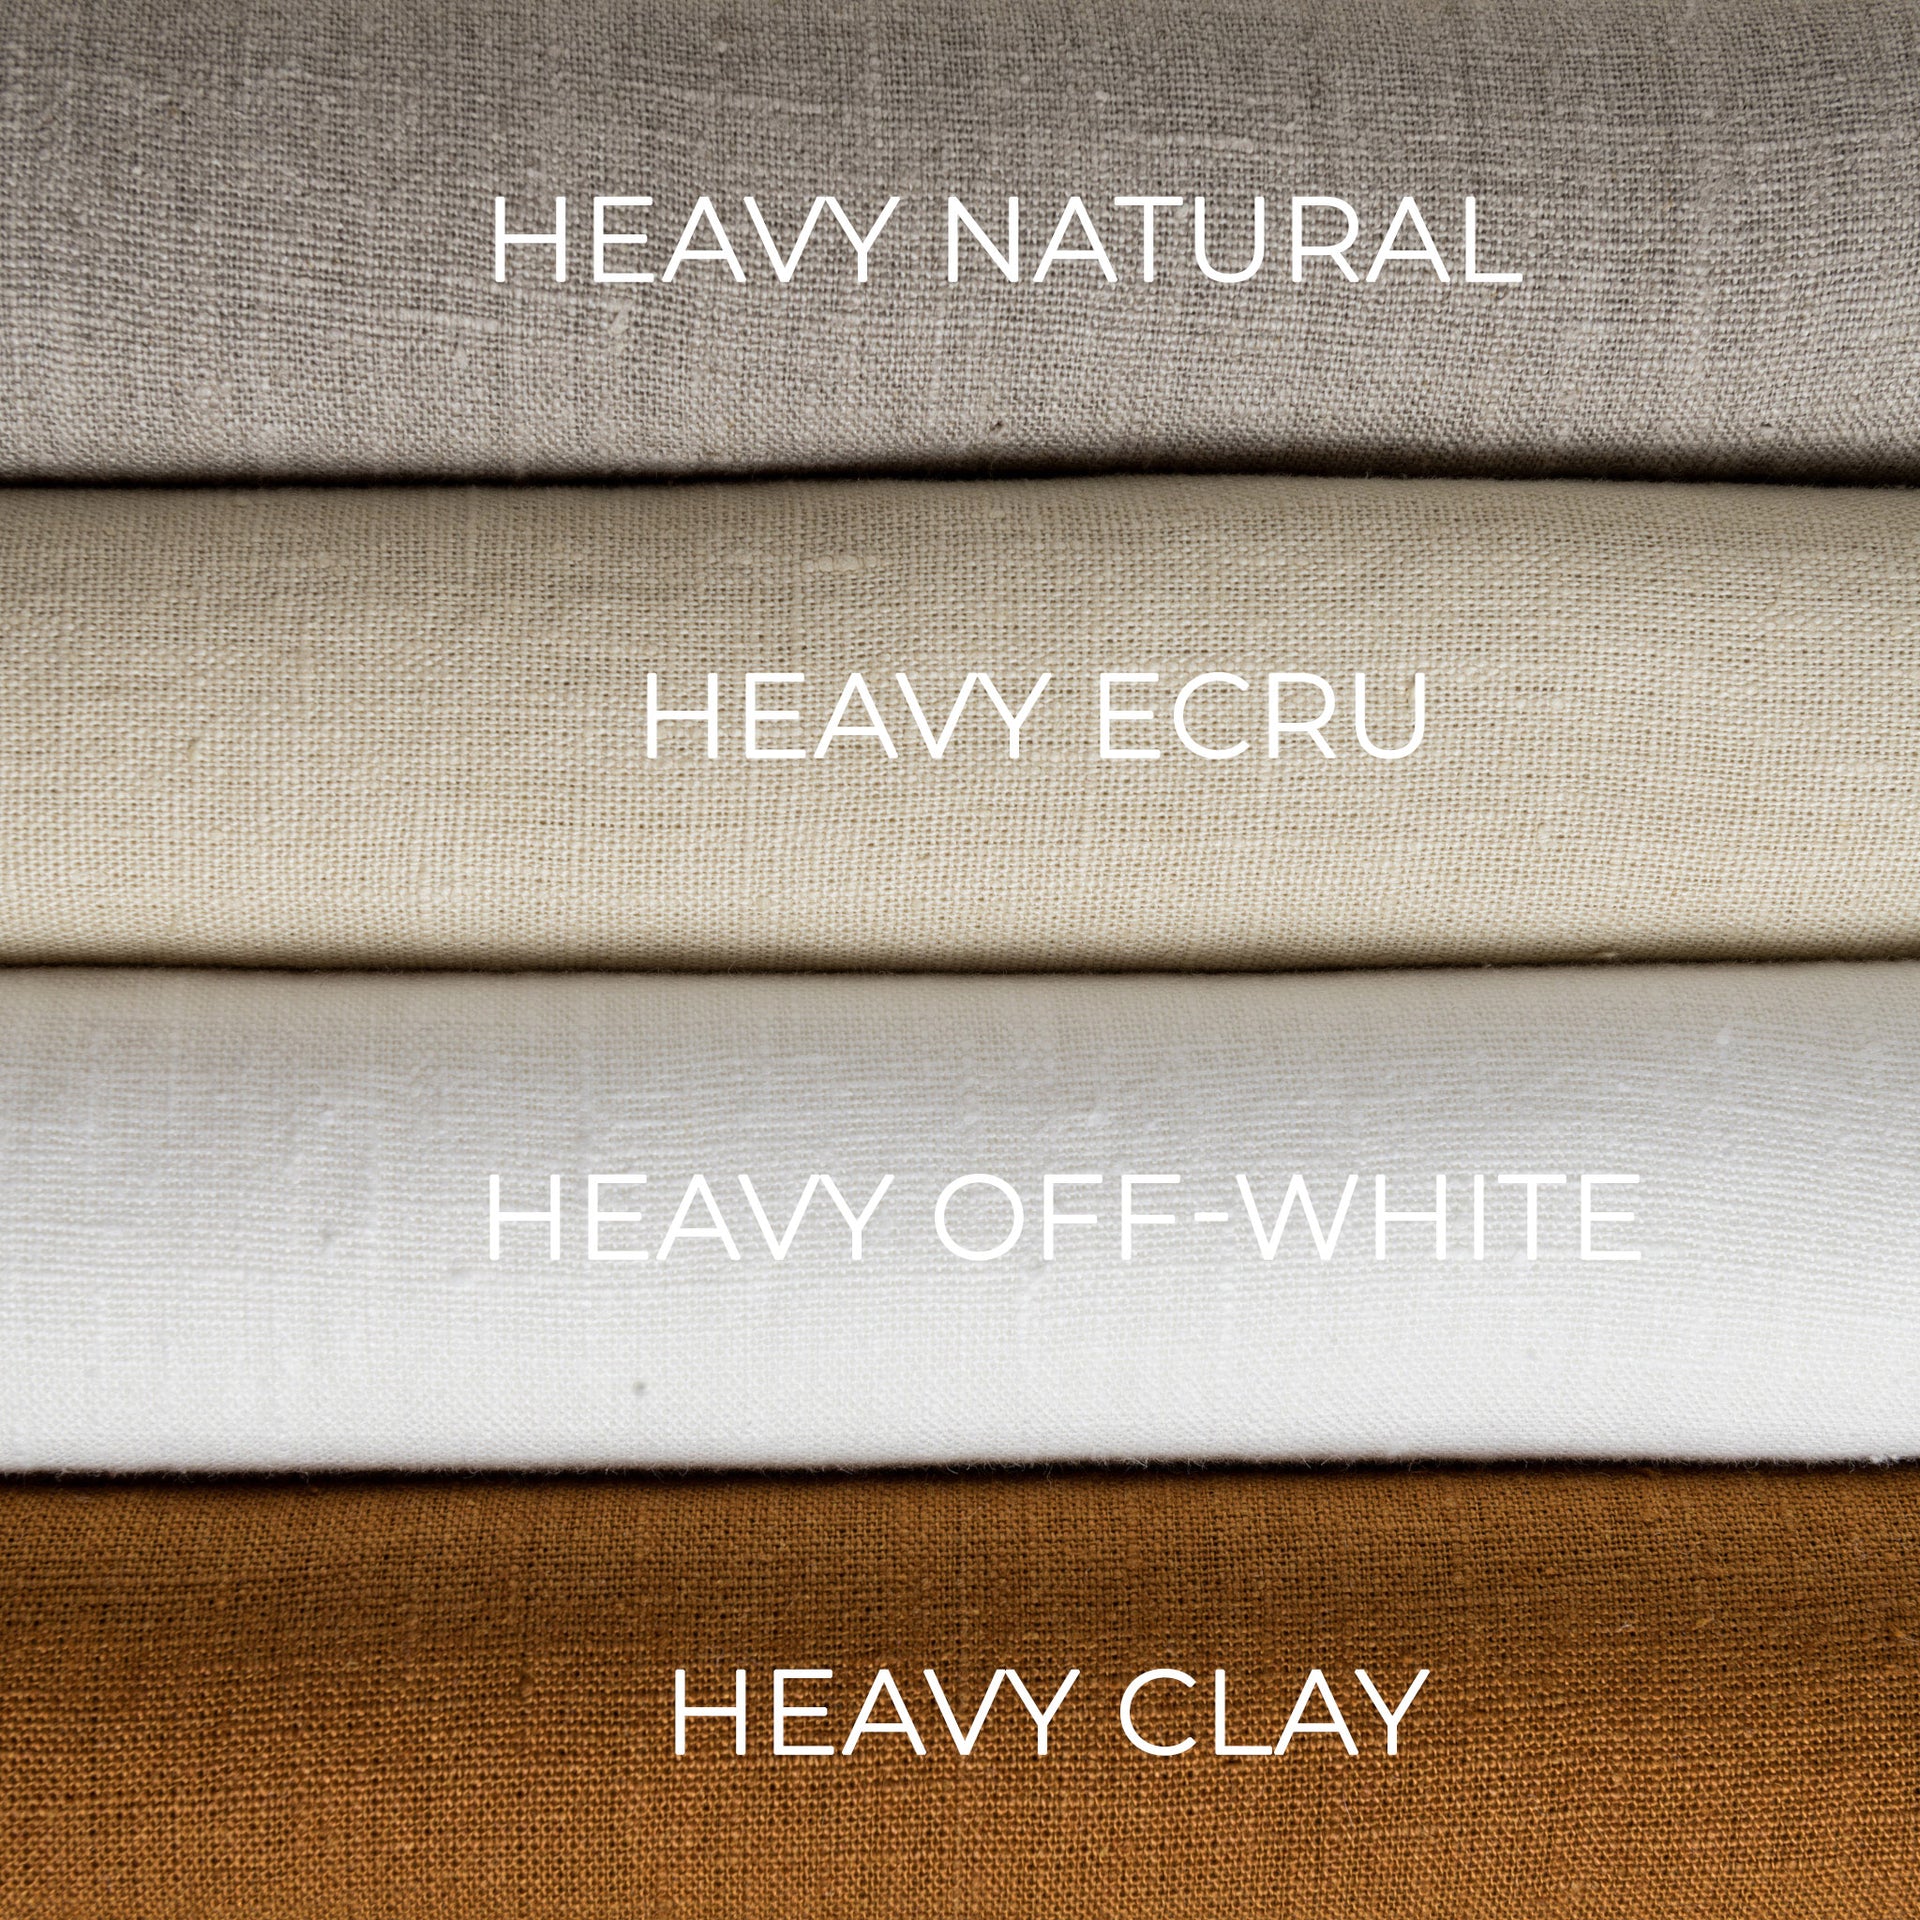 @Top Color: Heavy Weight Natural, Color: Heavy Weight Ecru, Color: Heavy Weight Off-White, Color: Heavy Weight Clay